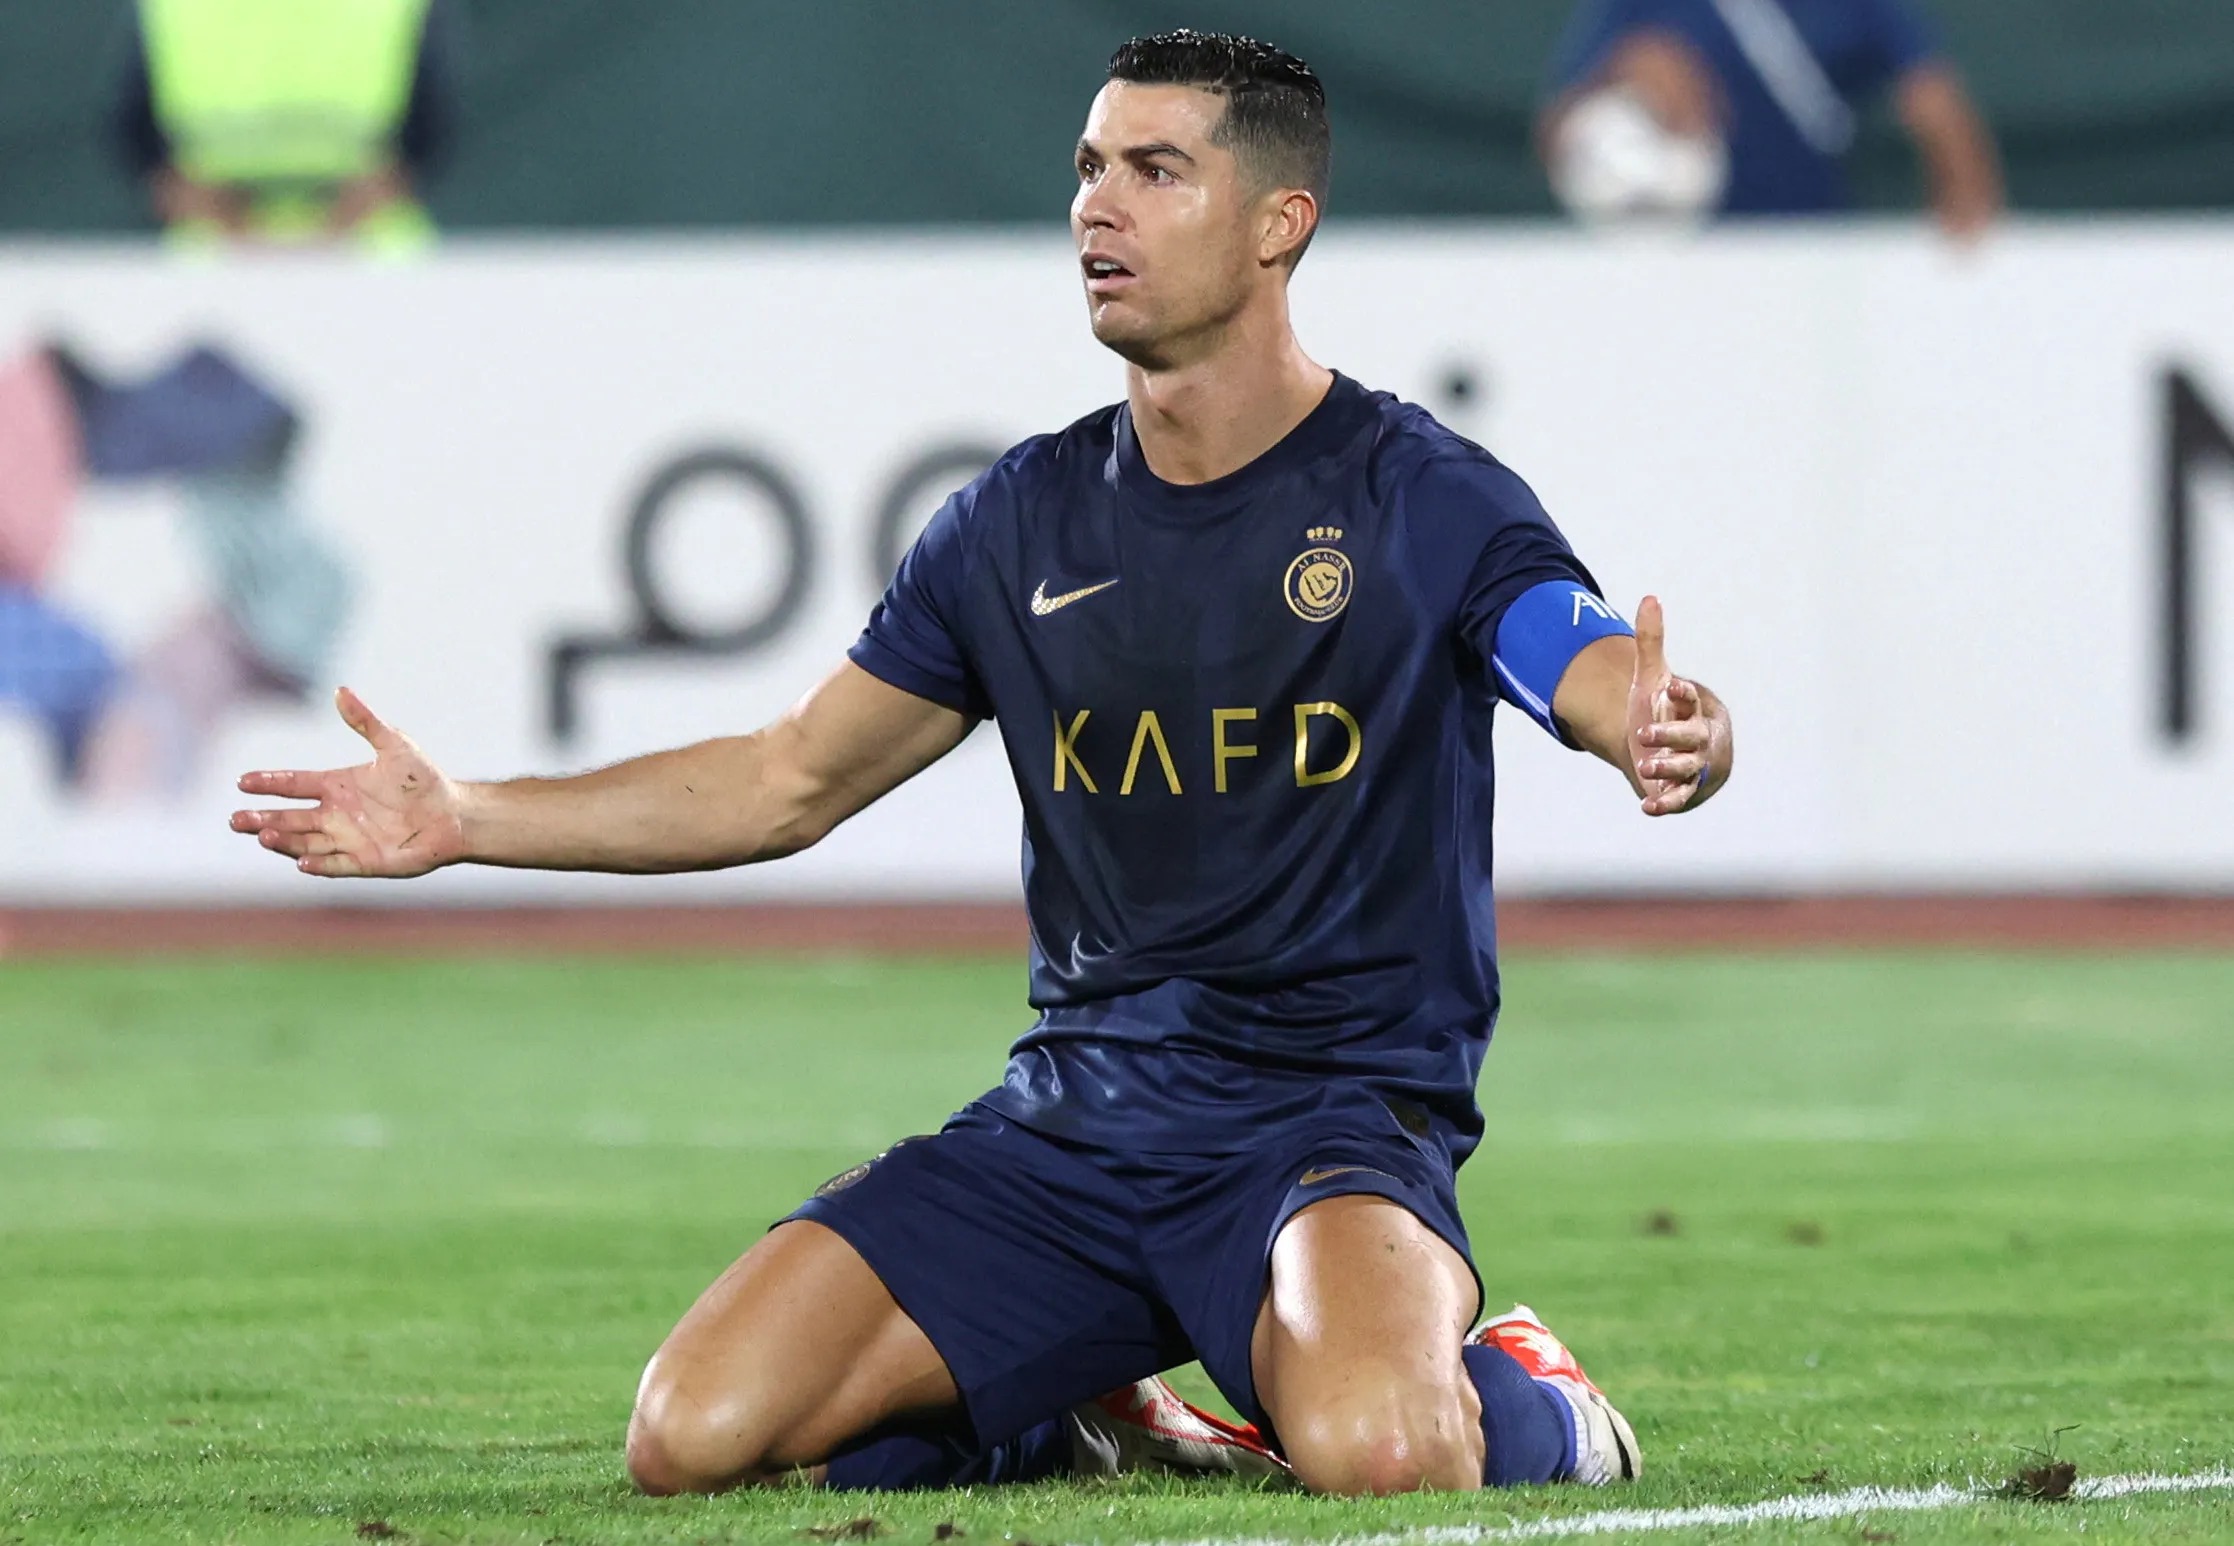 Explain the reason why Ronaldo has to play in front of a 'Creepy crowd' in AFC Champions League